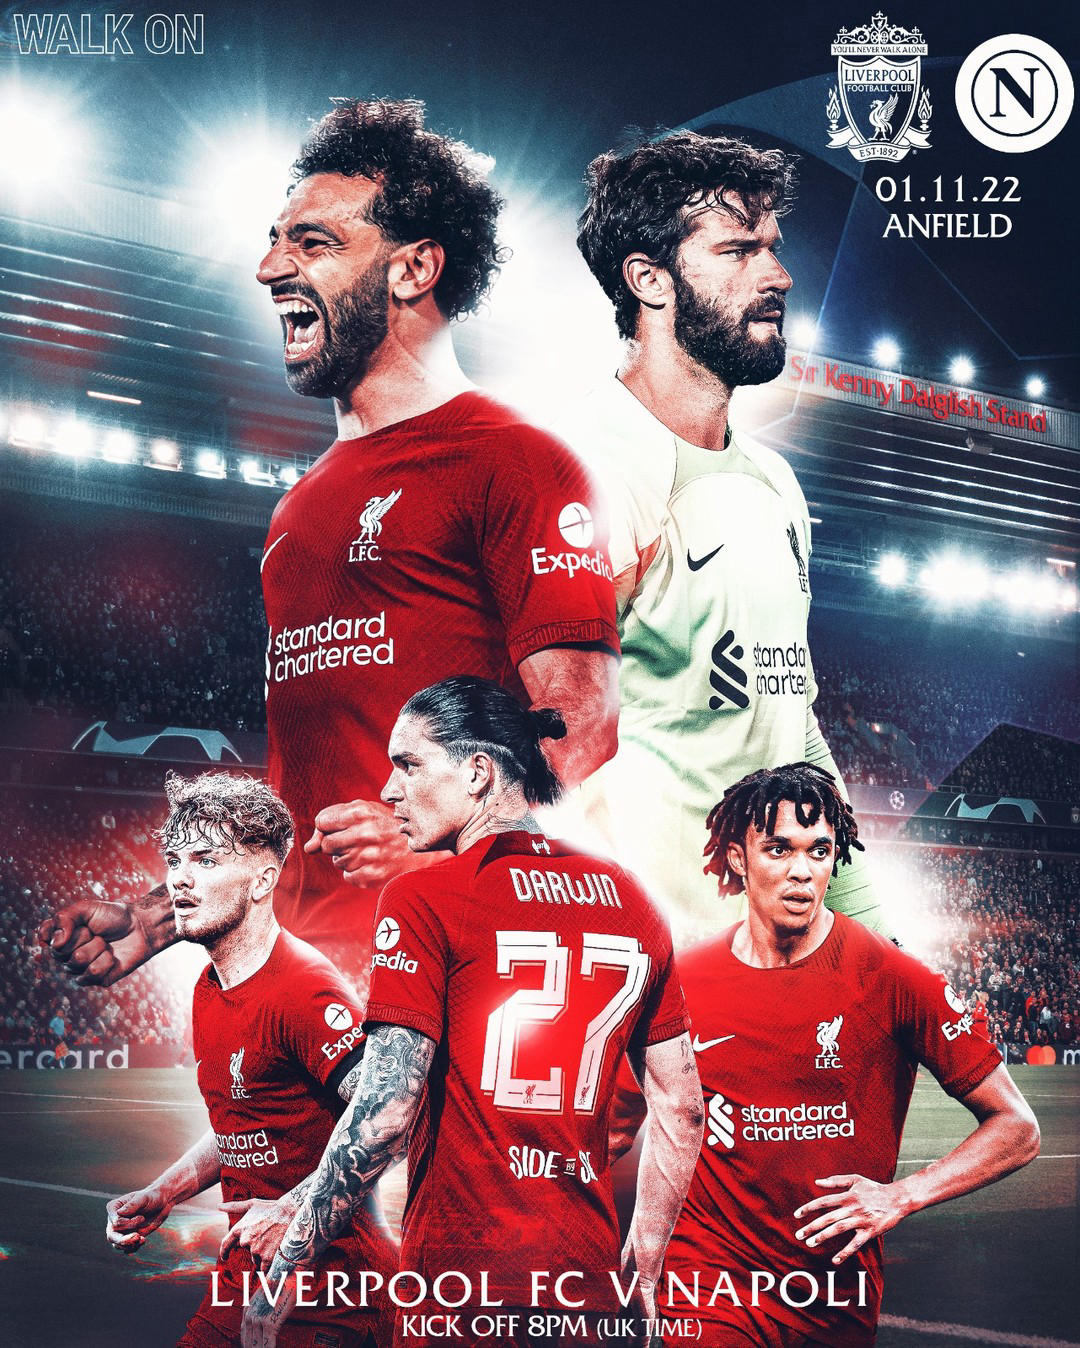 Liverpool Football Club - It's matchday, as we take on Napoli to round off #championsleague Group A